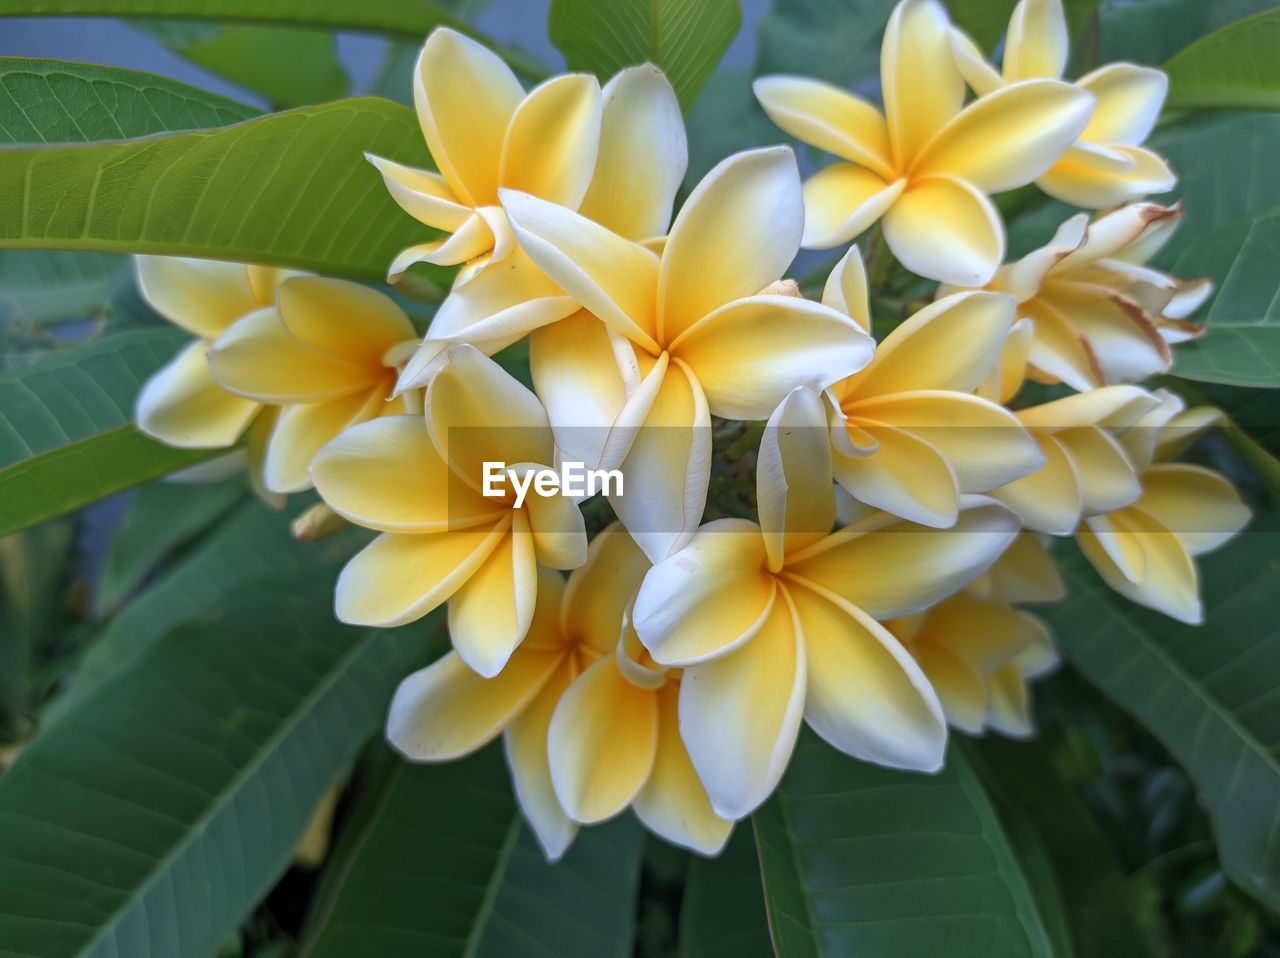 plant, flower, flowering plant, beauty in nature, leaf, freshness, plant part, petal, close-up, frangipani, yellow, nature, growth, flower head, inflorescence, fragility, no people, tropical climate, outdoors, green, day, focus on foreground